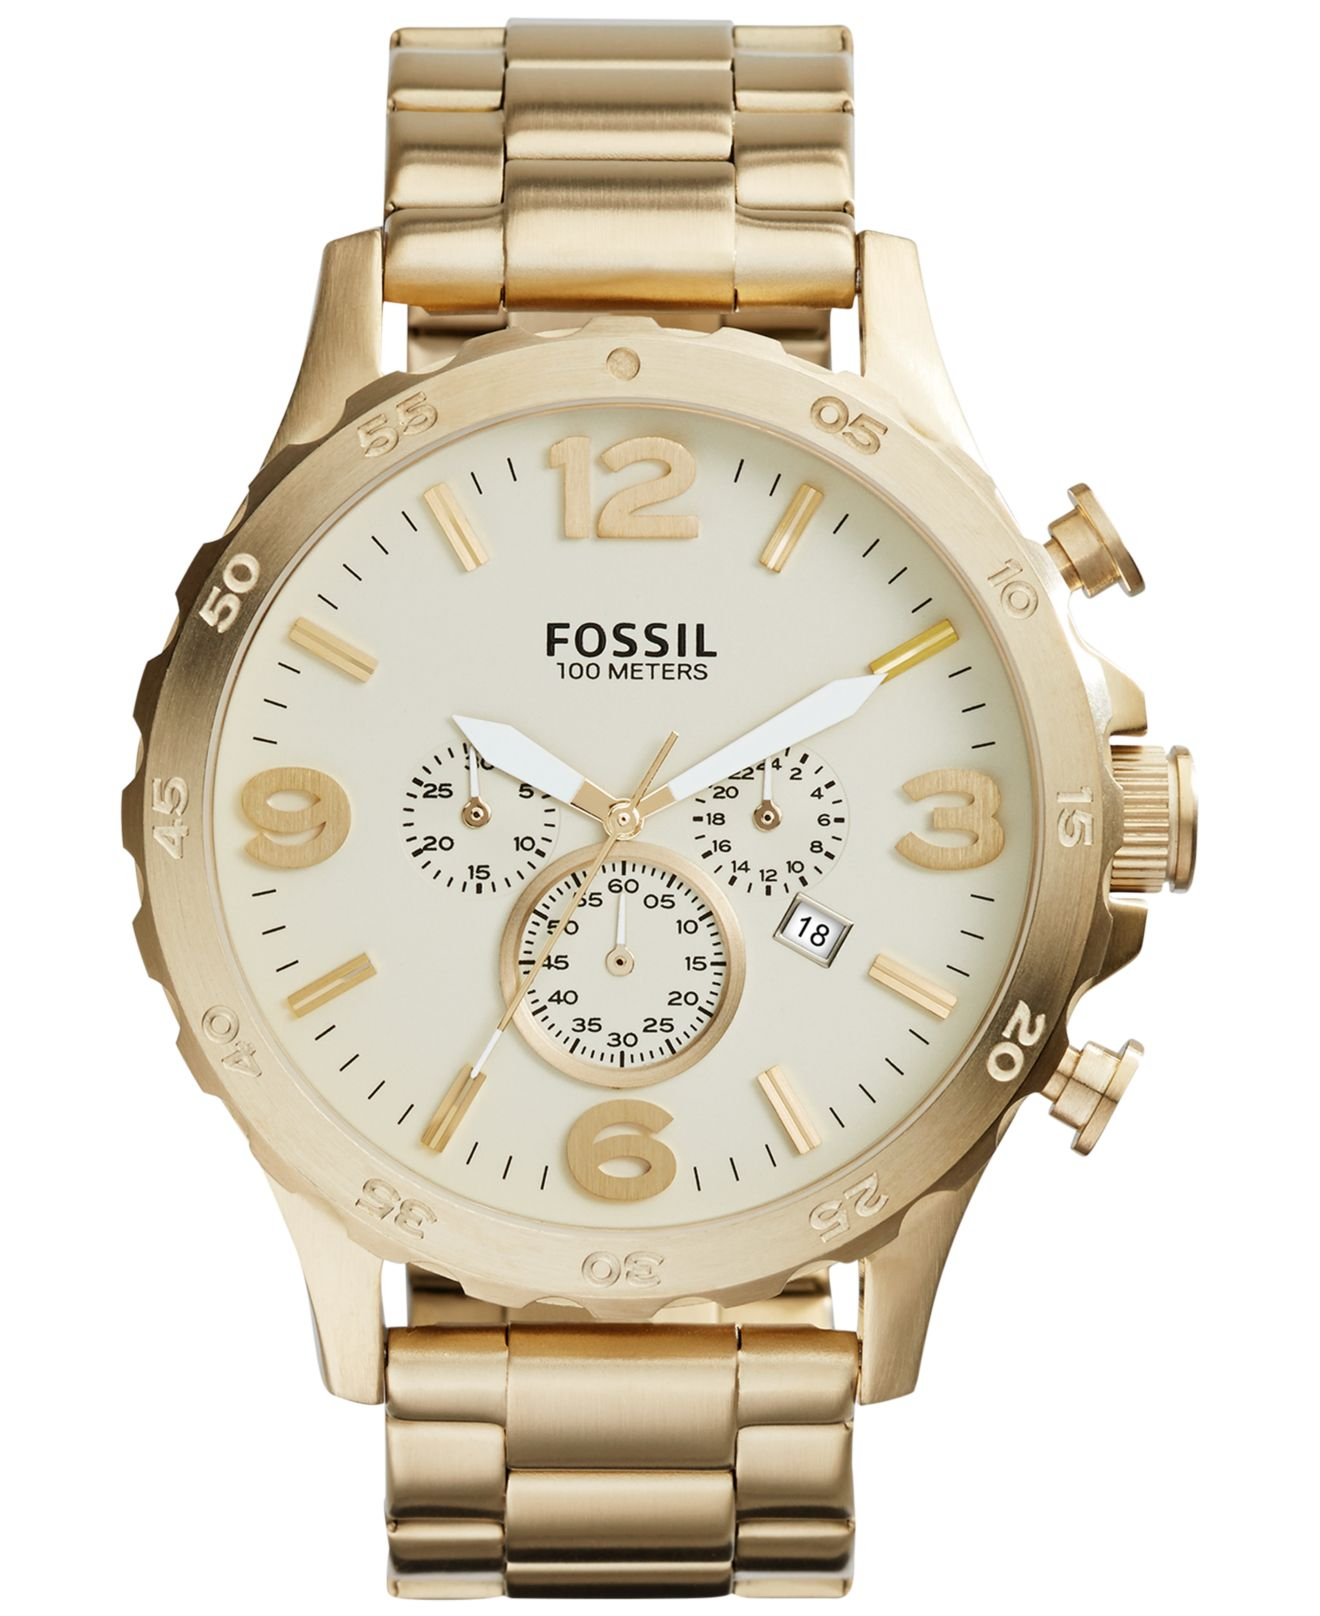 Fossil Men's Chronograph Nate Gold-tone Stainless Steel Bracelet Watch